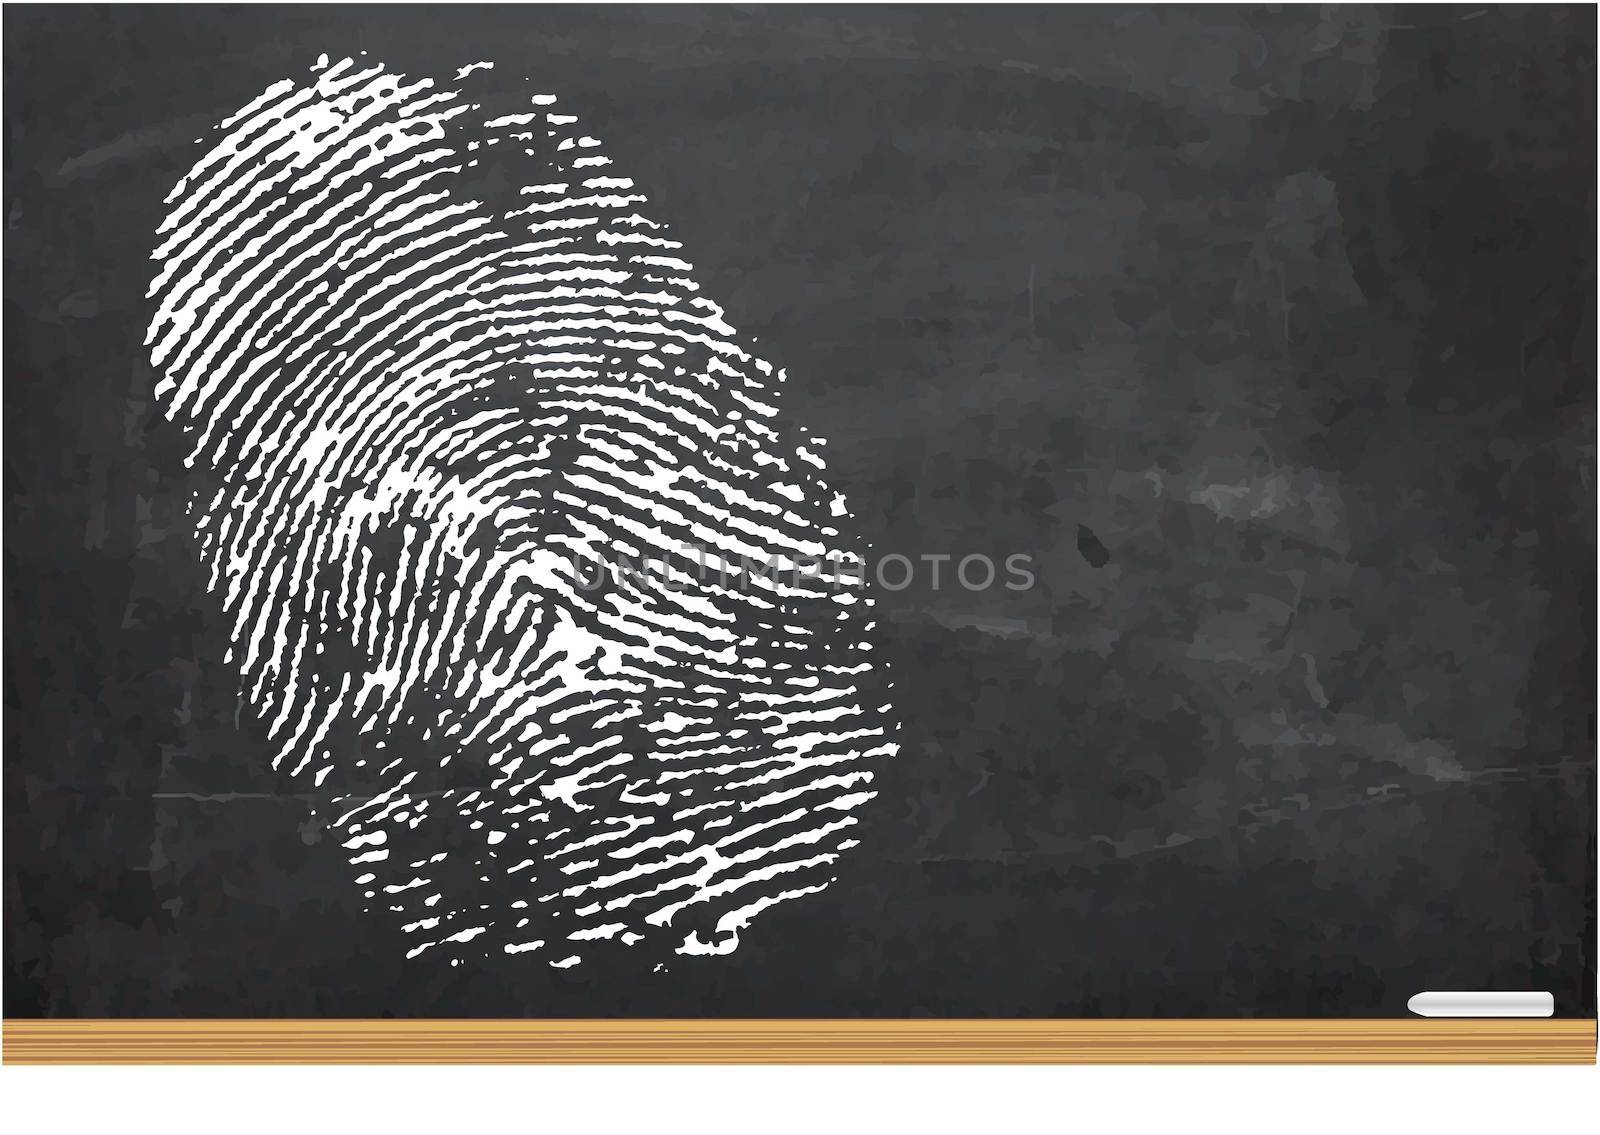 An Illustration of a Thumb Print on a Chalk Board